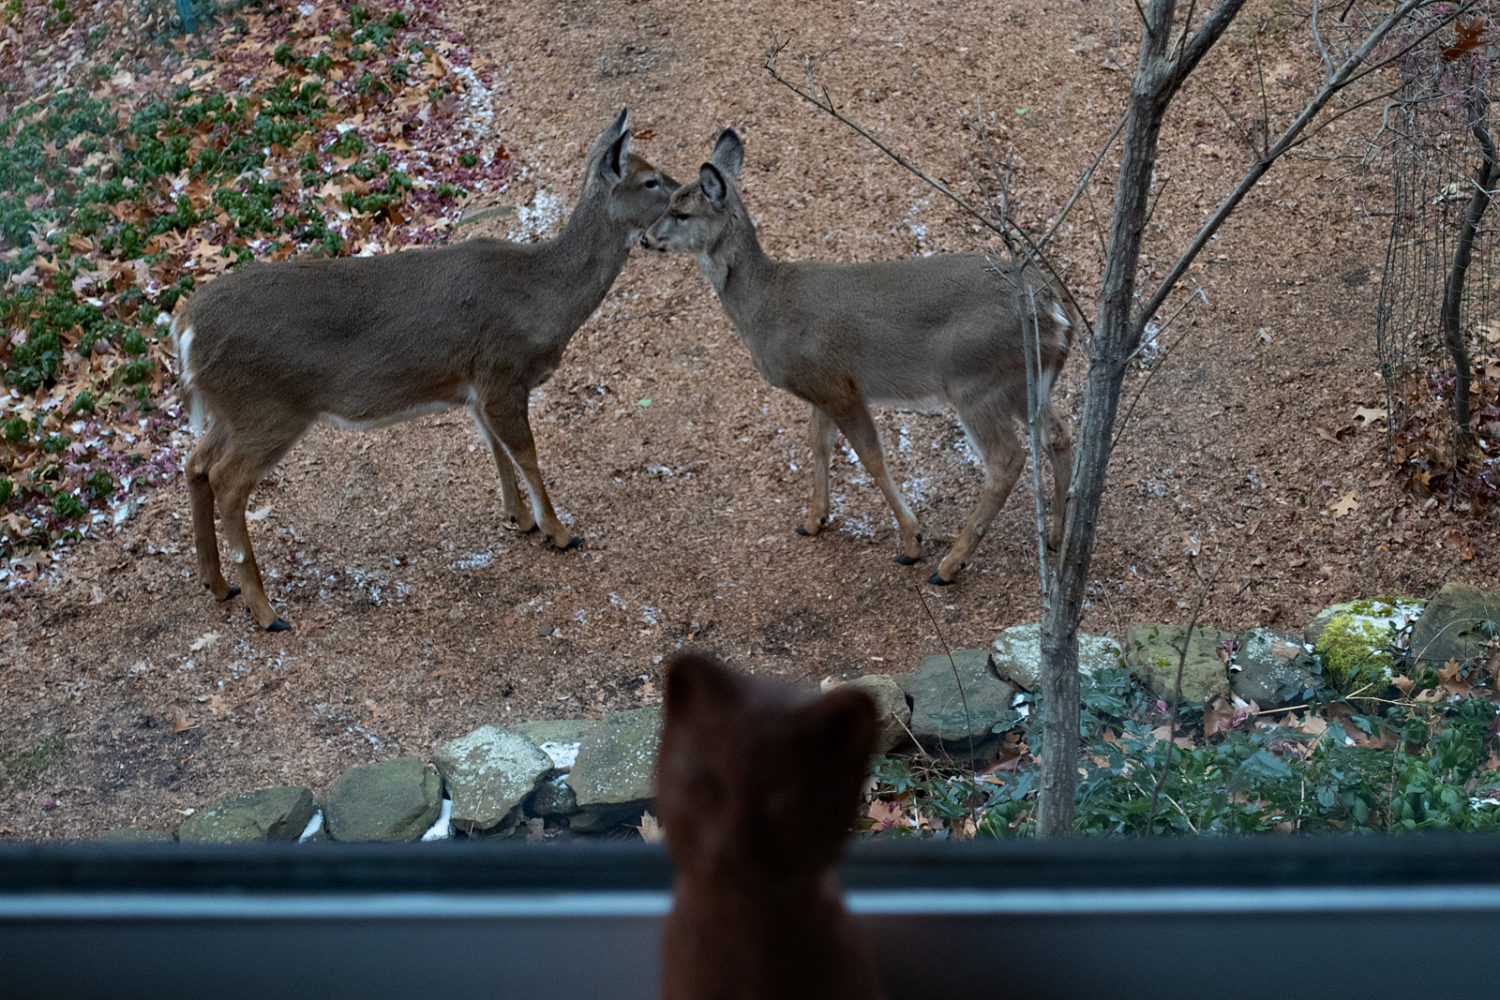 Peggi's junior high cat sculpture in window with two deer out back